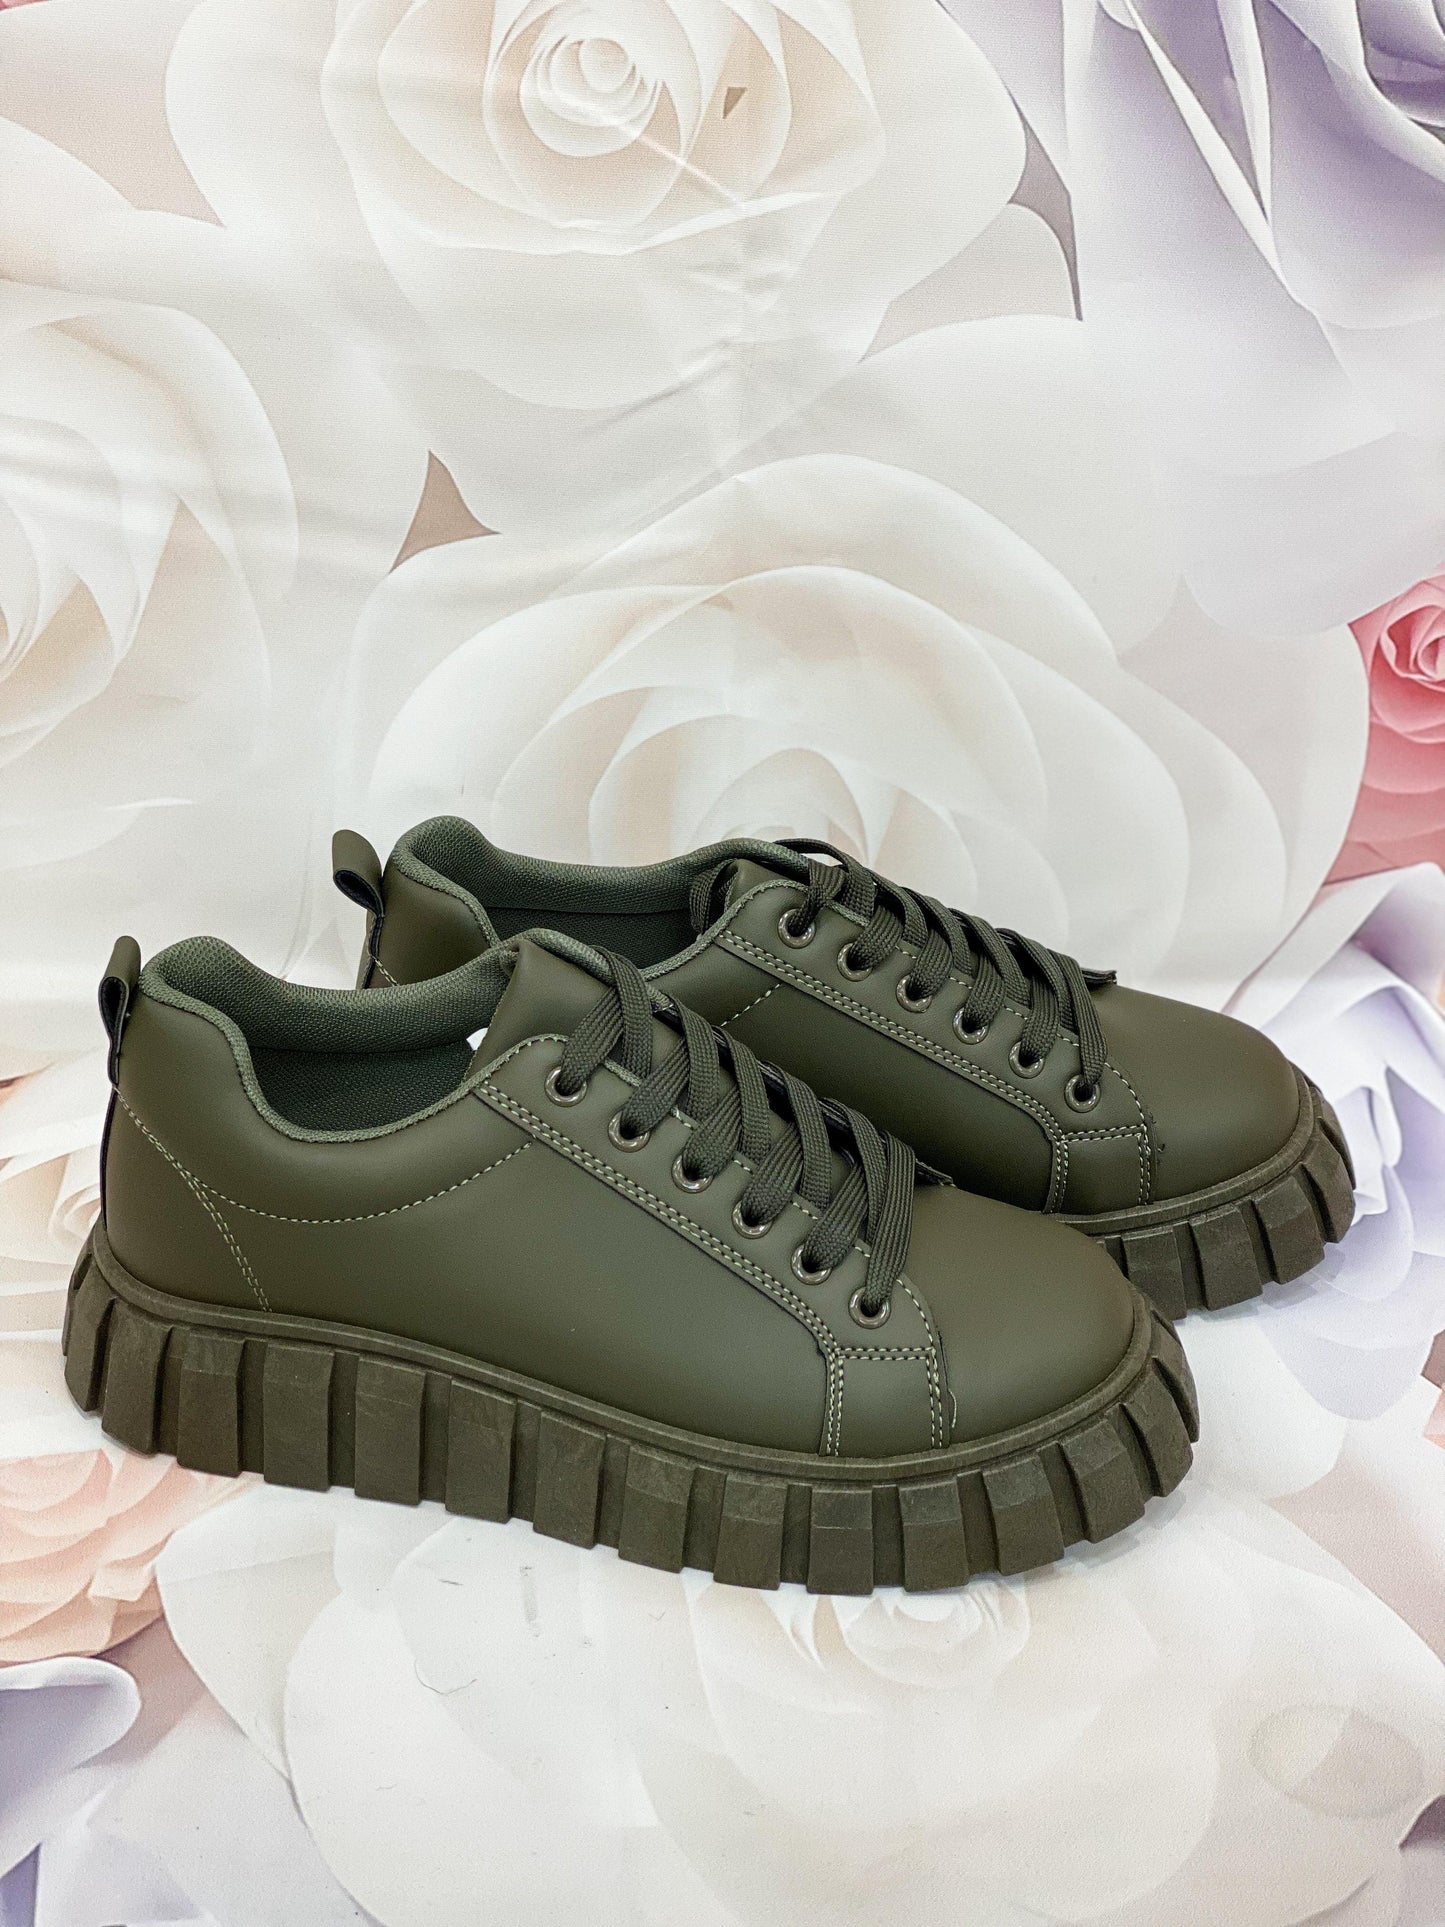 Dream High Sneaker Olive-8-Olive-Abundance Junky Stylish Clothing Boutique for Women